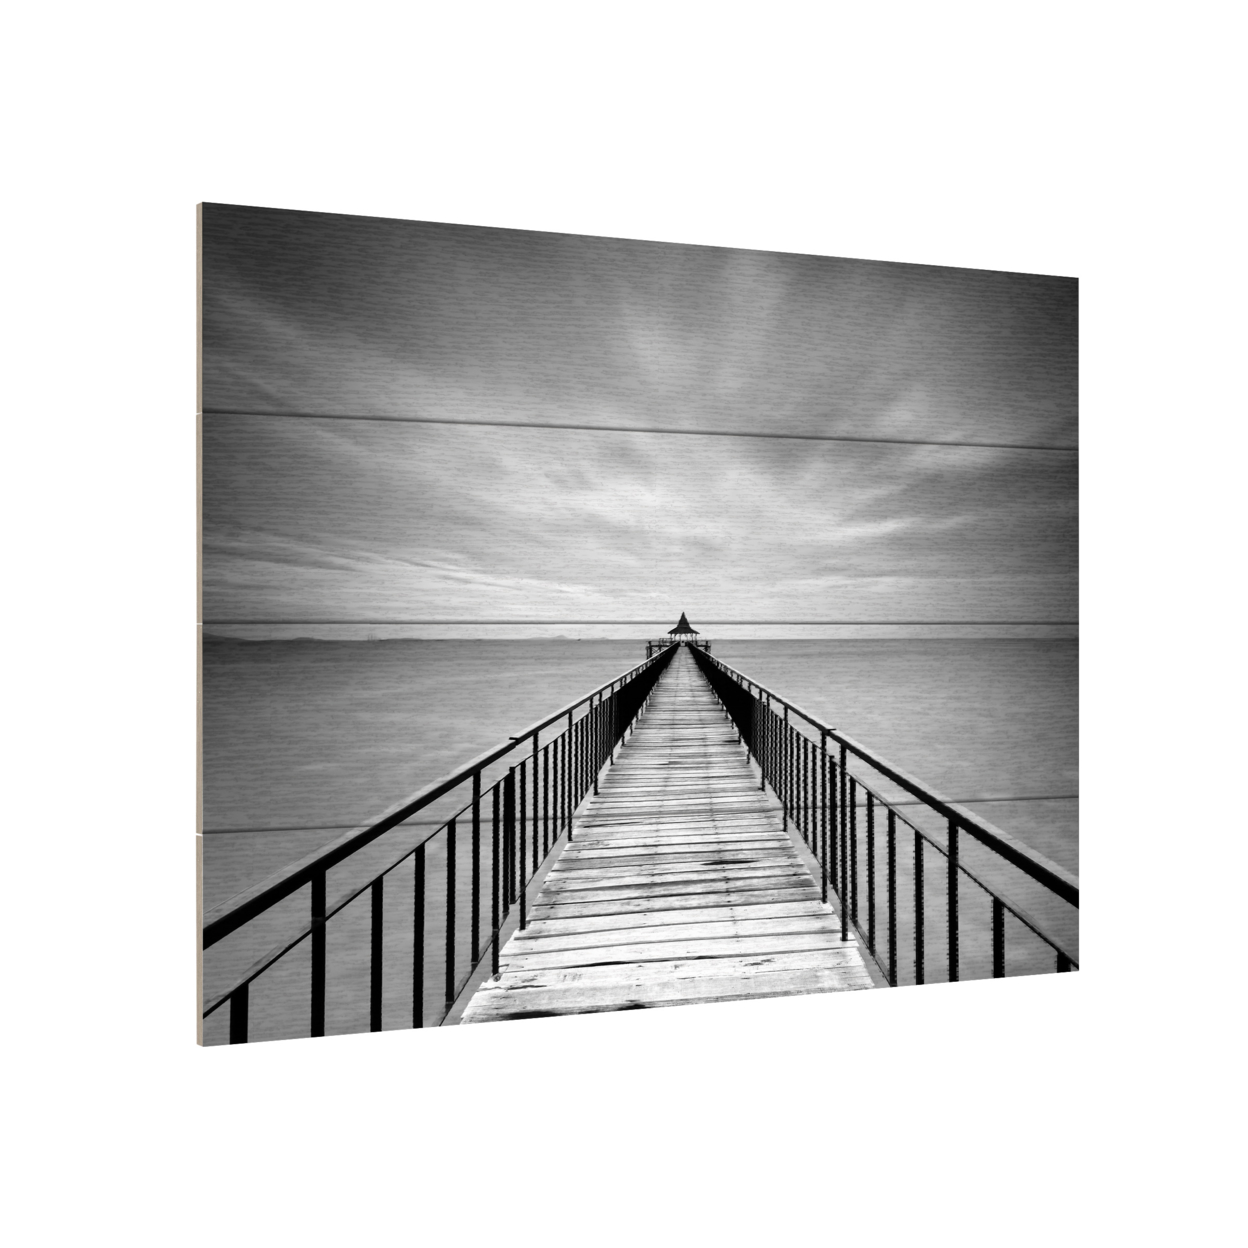 Wall Art 12 X 16 Inches Titled Withstand Ready To Hang Printed On Wooden Planks